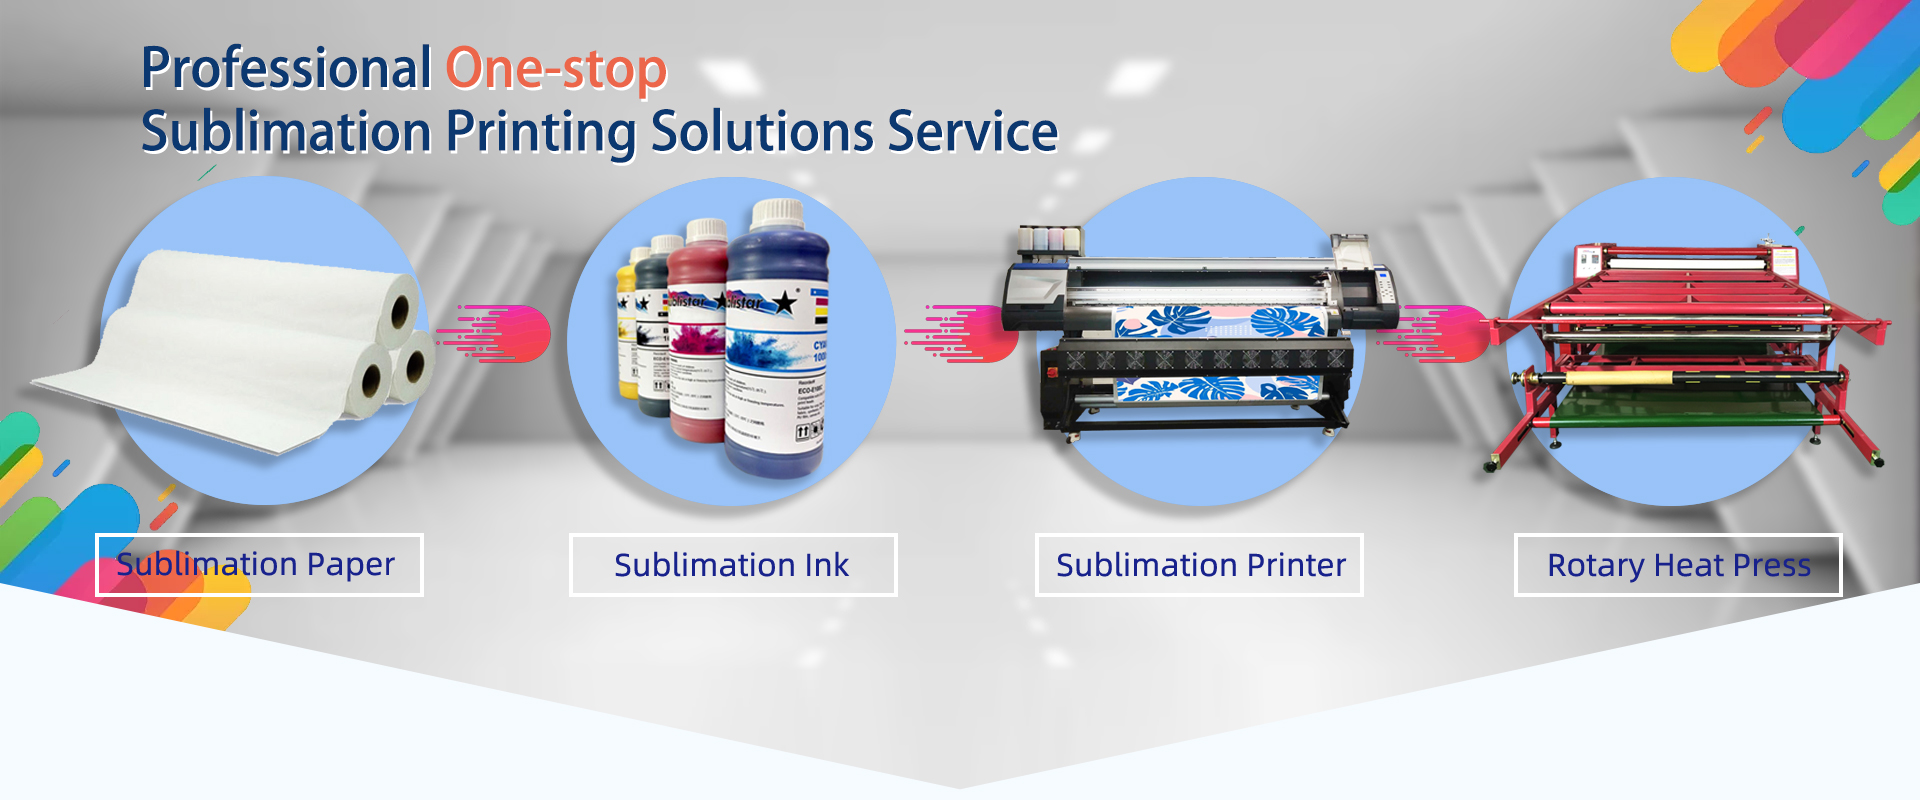 disadvantages of using sublimation ink